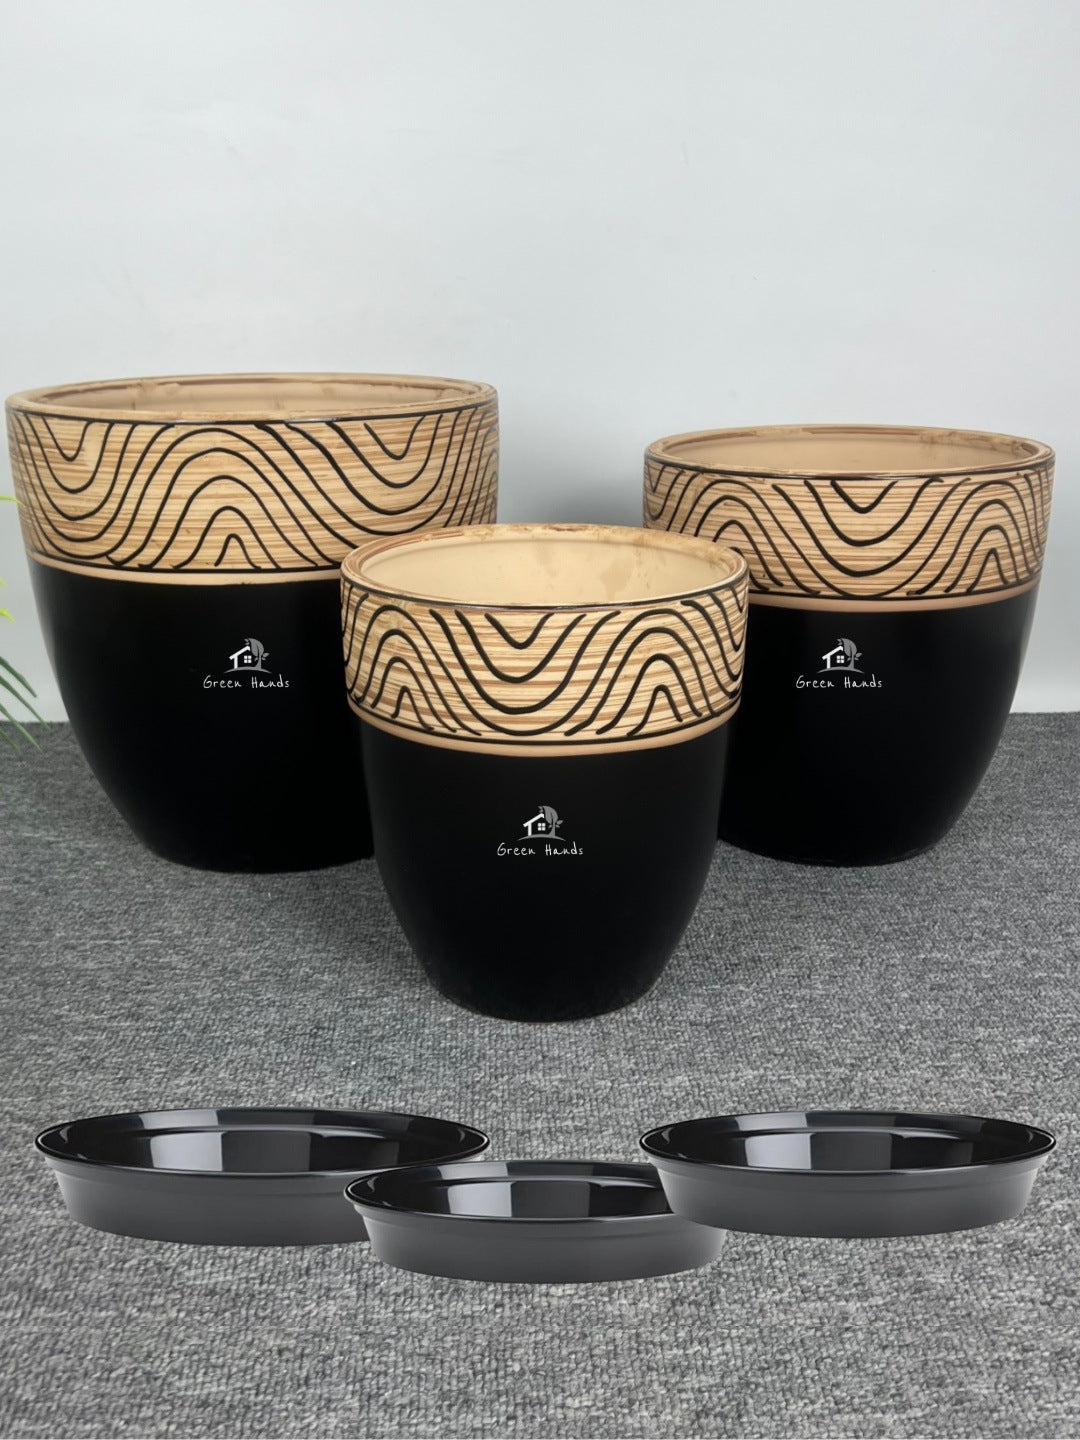 Artistic Black Ceramic Pots with Wooden Carving Finish in Dubai & Abu Dhabi: Natural Design with Drain Holes